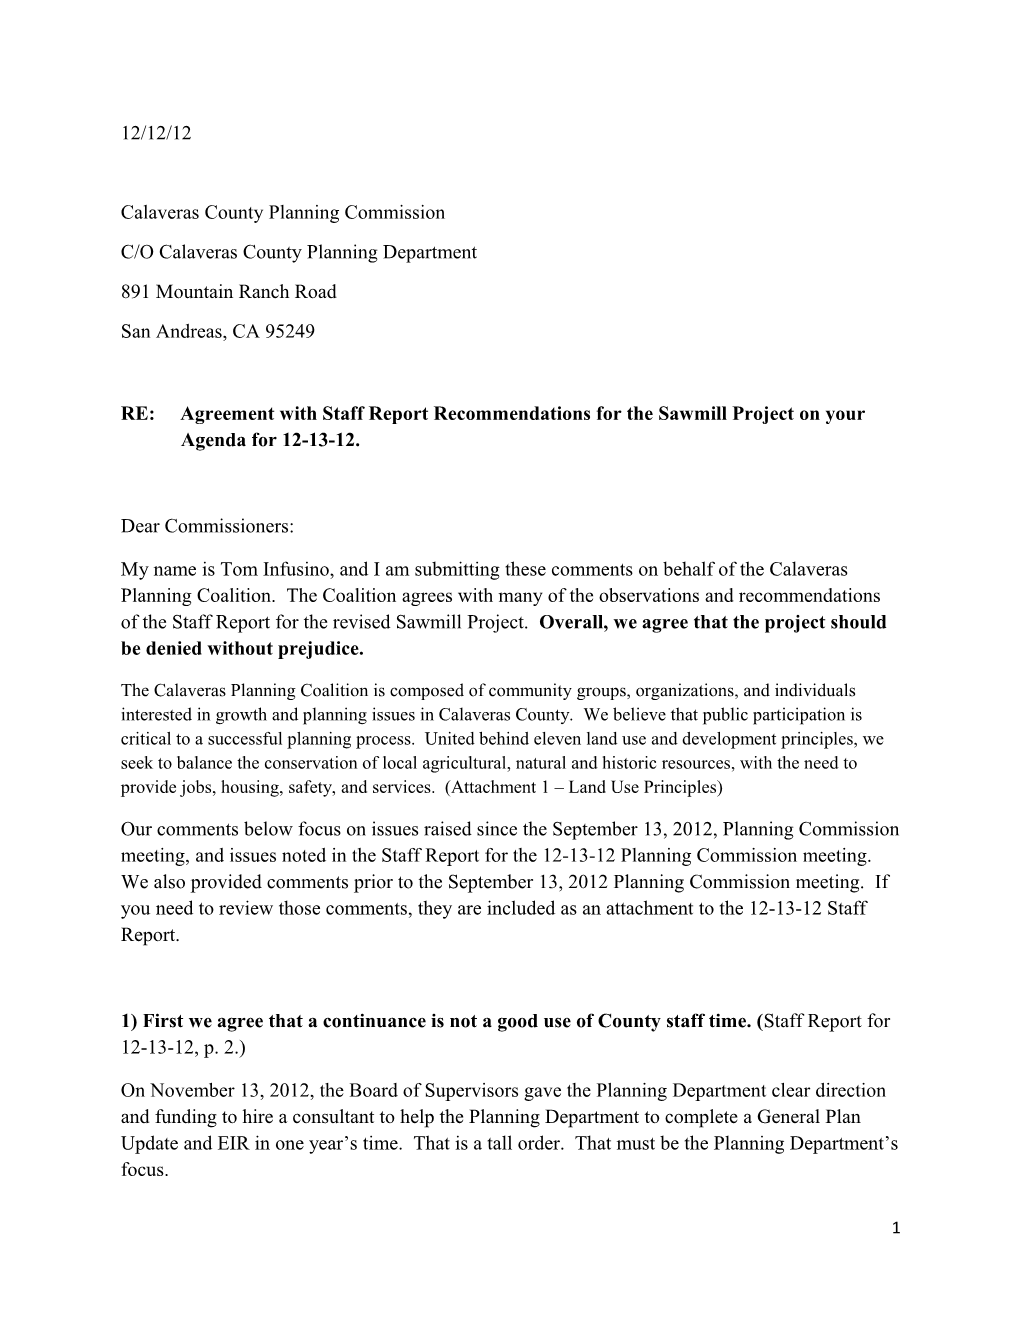 Calaveras County Planning Commission